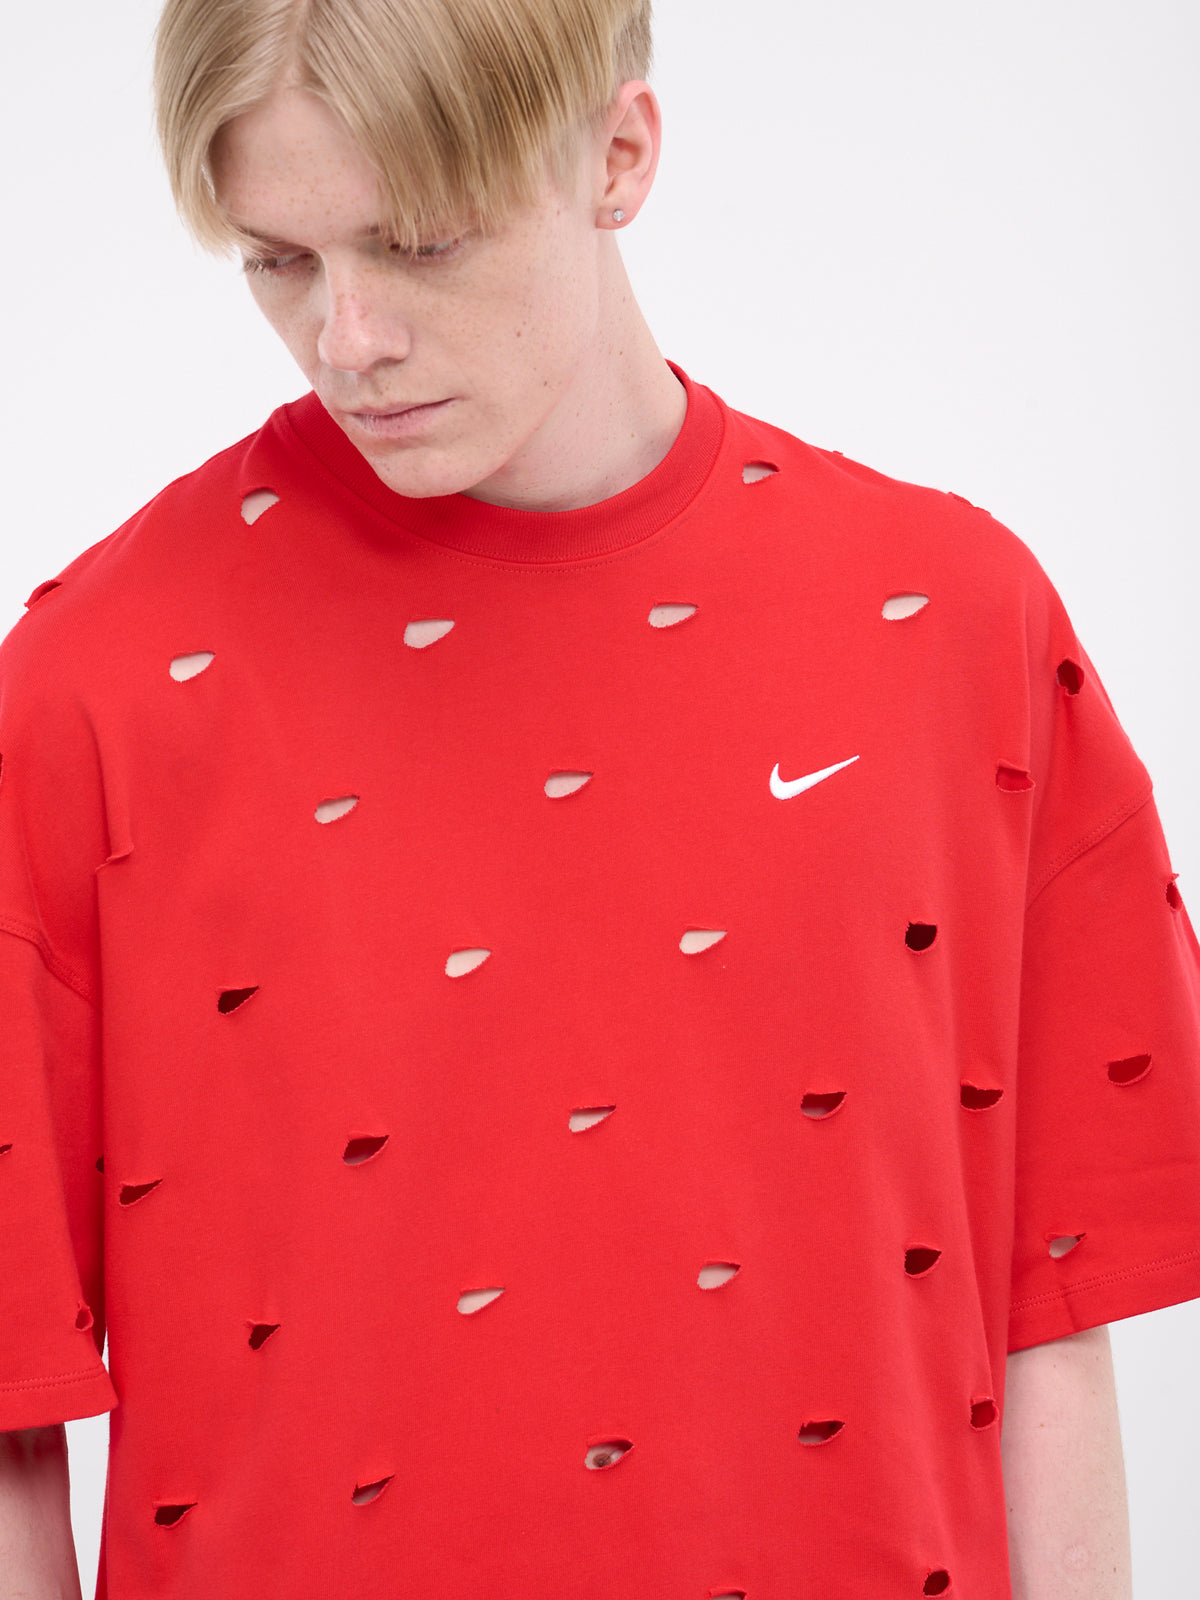 Jacquemus Cut-Out Swoosh Tee (FJ3477-657-UNIVERISTY-RED)